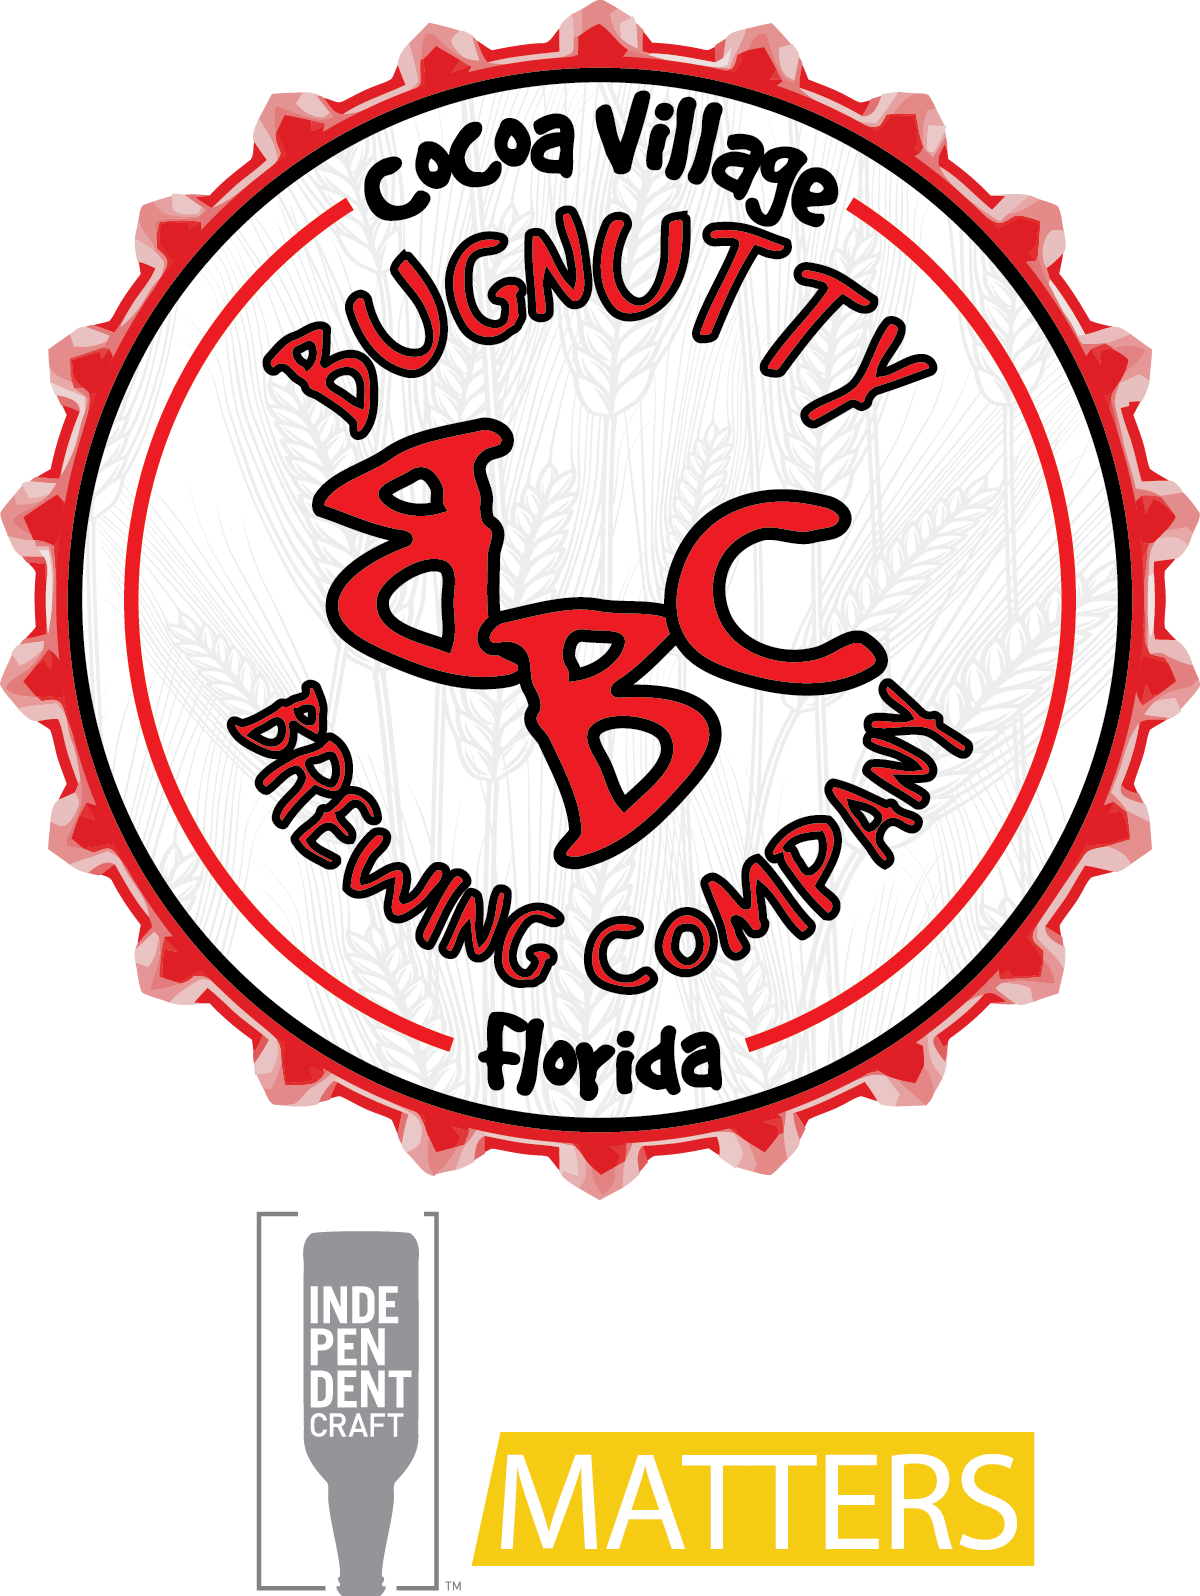 Bugnutty Brewing Company Home